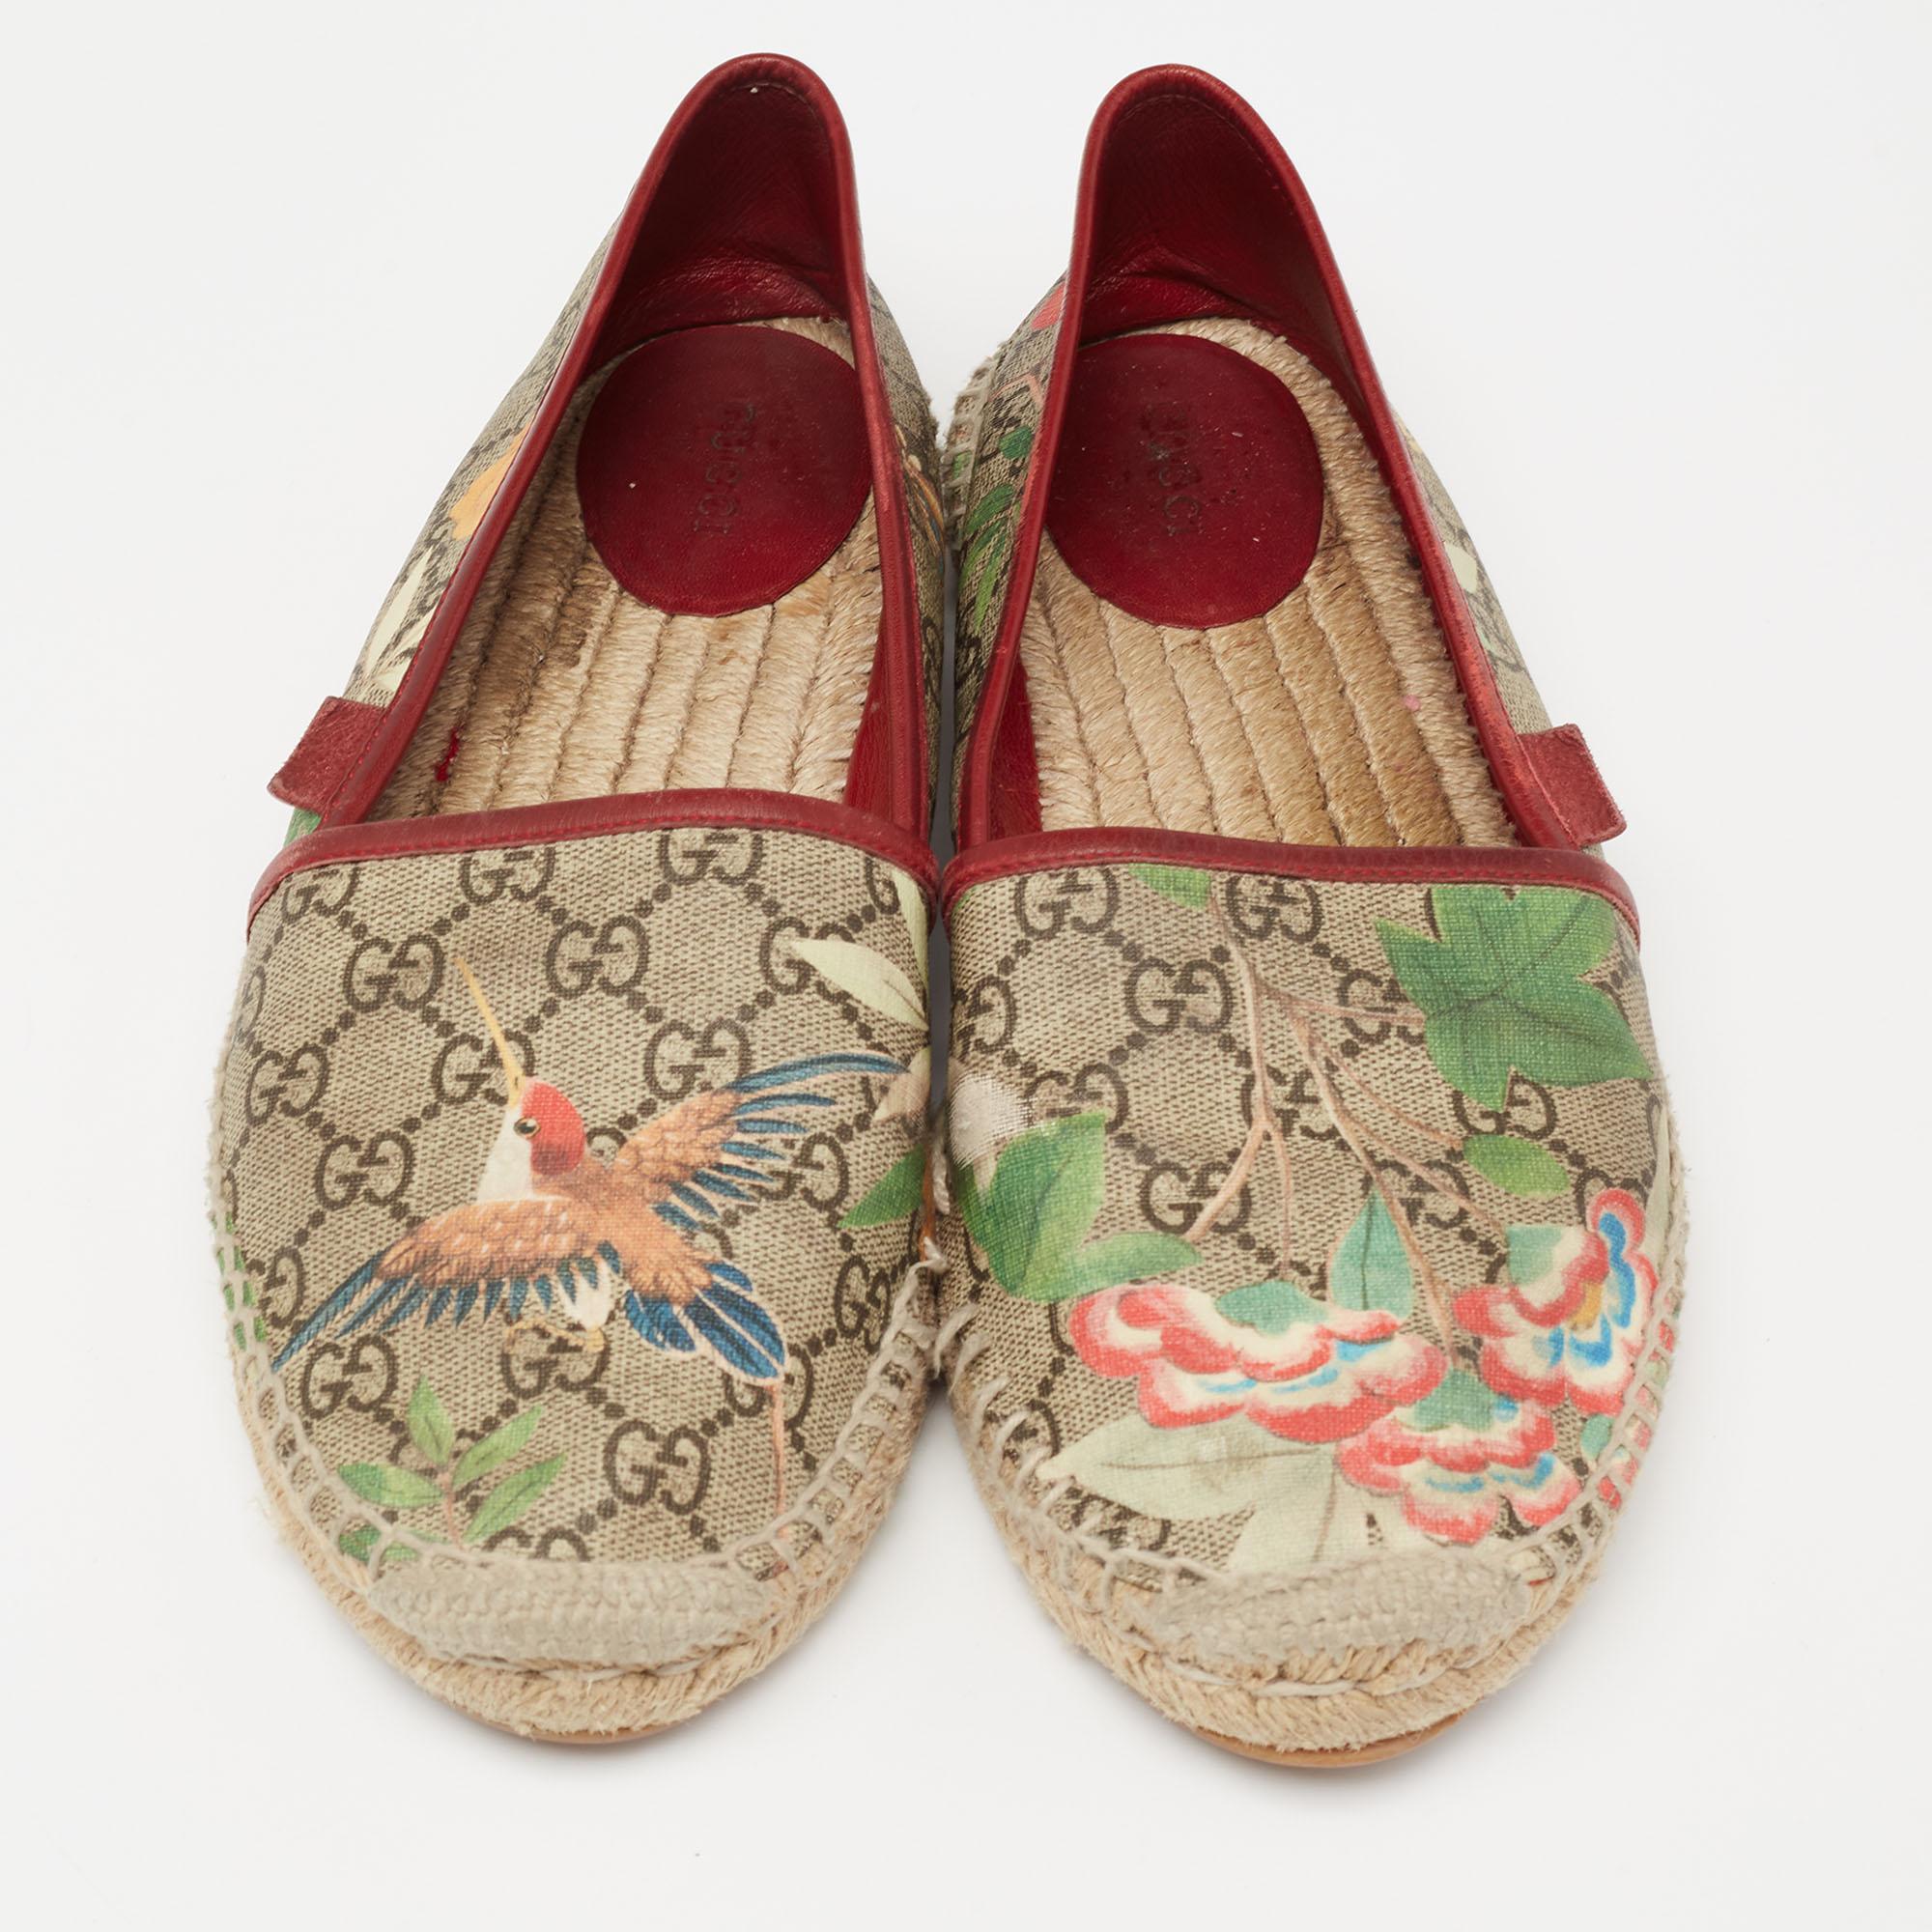 A stylish and luxurious daytime wear pair, these beautiful Gucci espadrilles are easy to slip on over casuals. Constructed in GG Supreme canvas, this pair features Tian prints along with contrast trims to complete the look.

